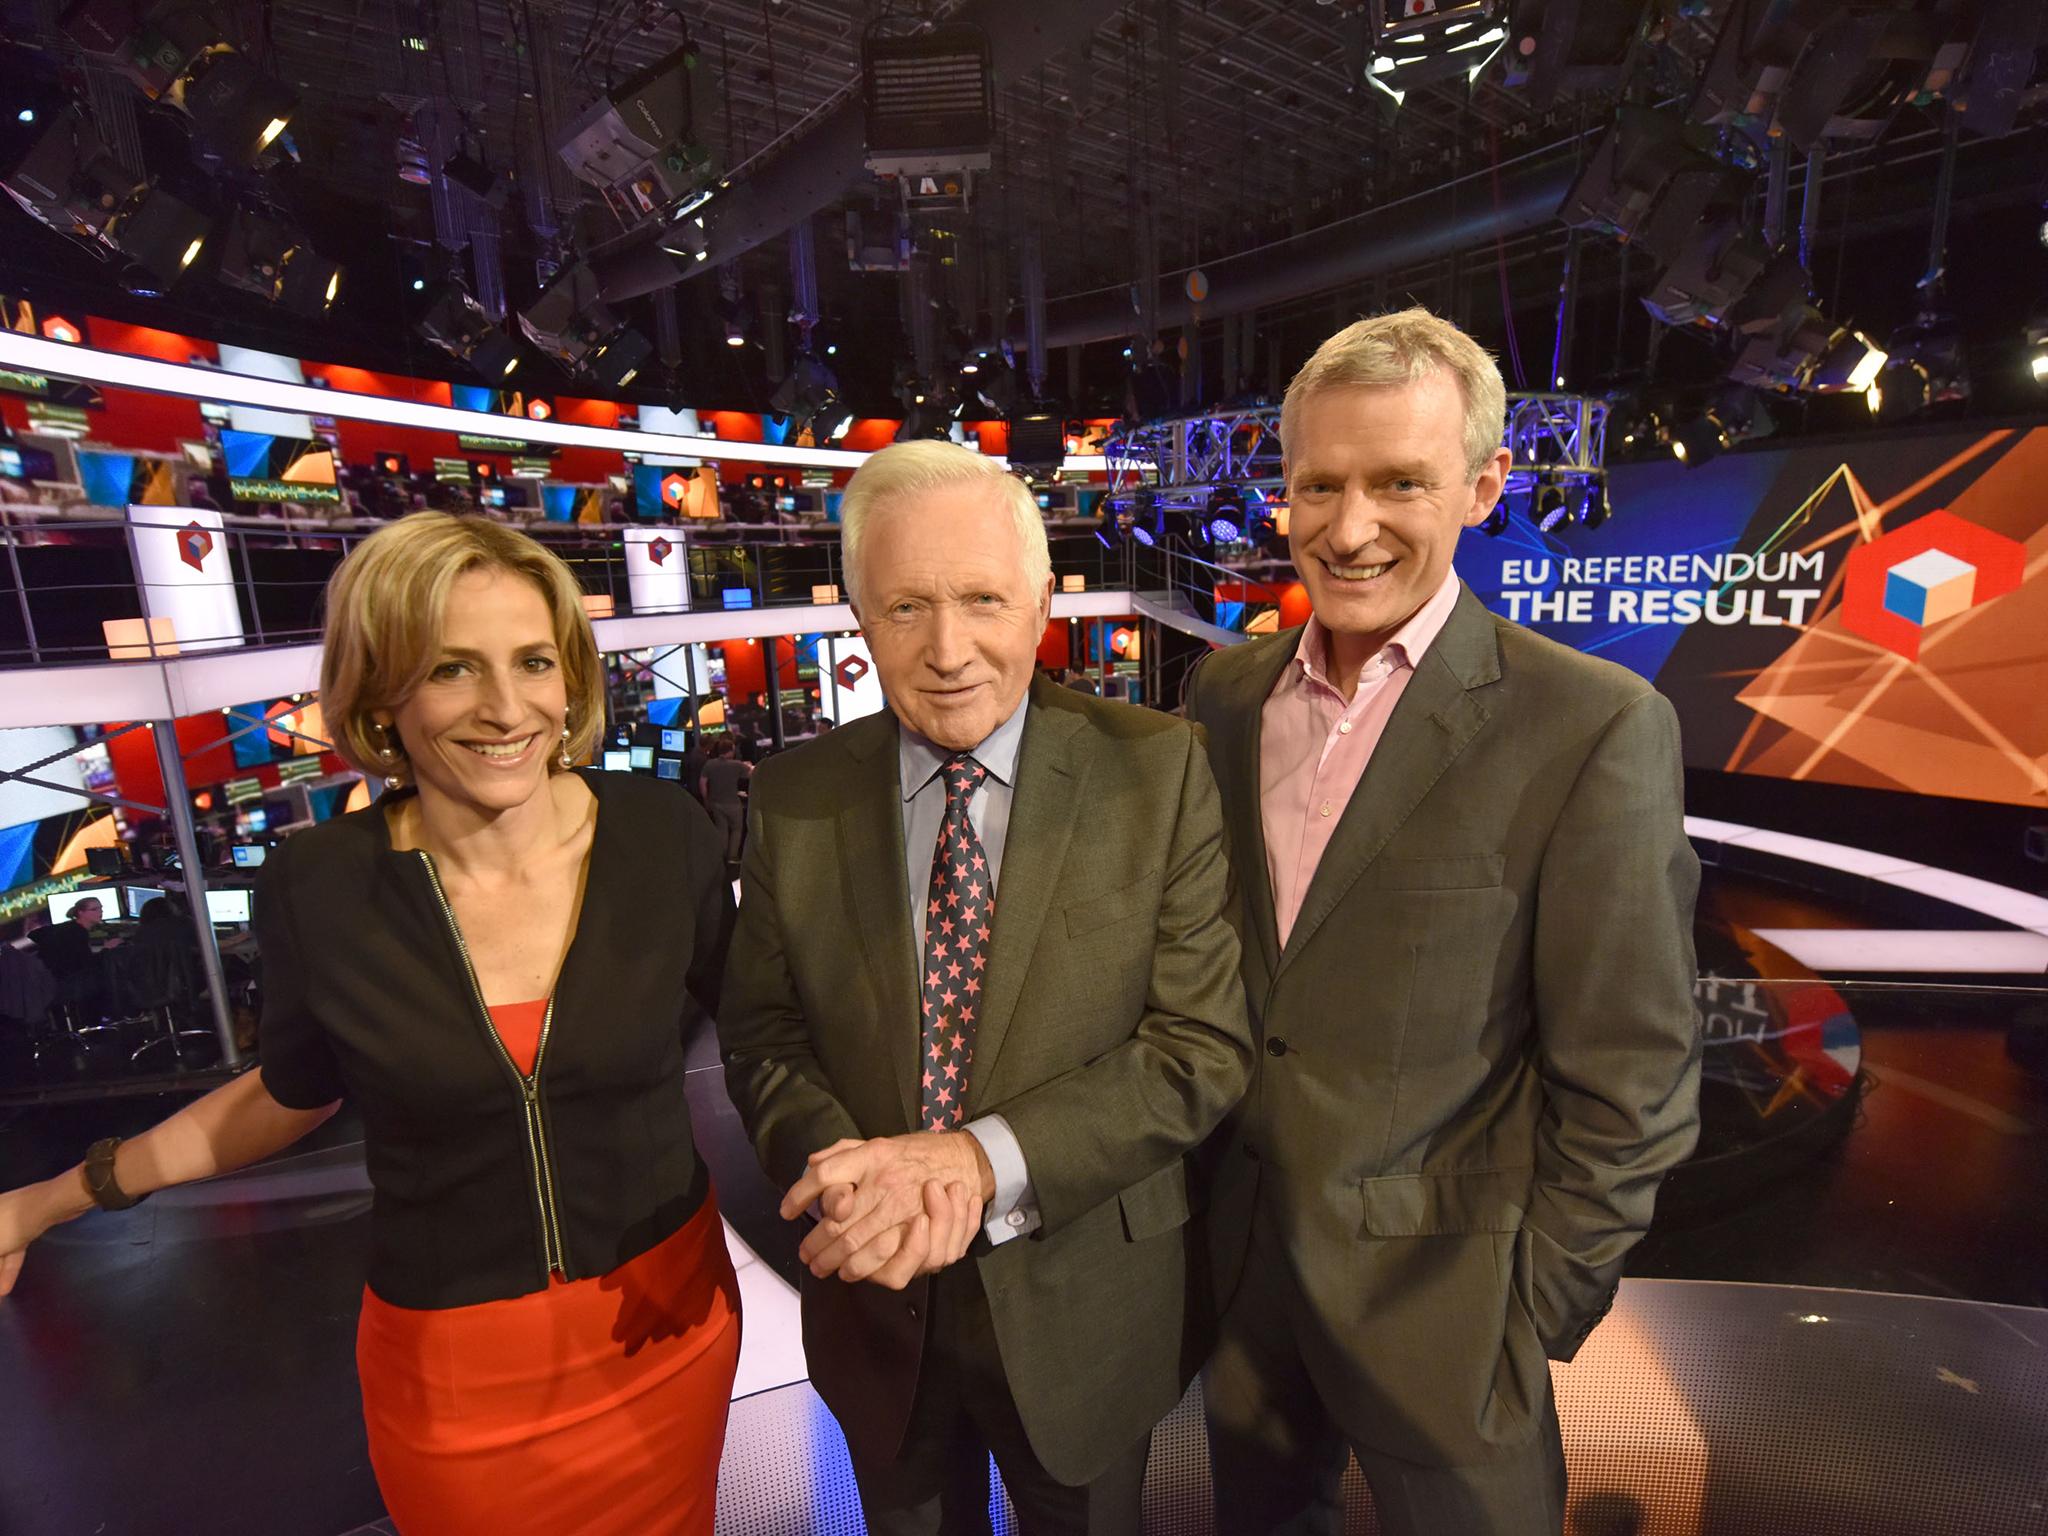 The BBC's referendum coverage will be fronted by Emily Maitlis, David Dimbleby and Jeremy Vine